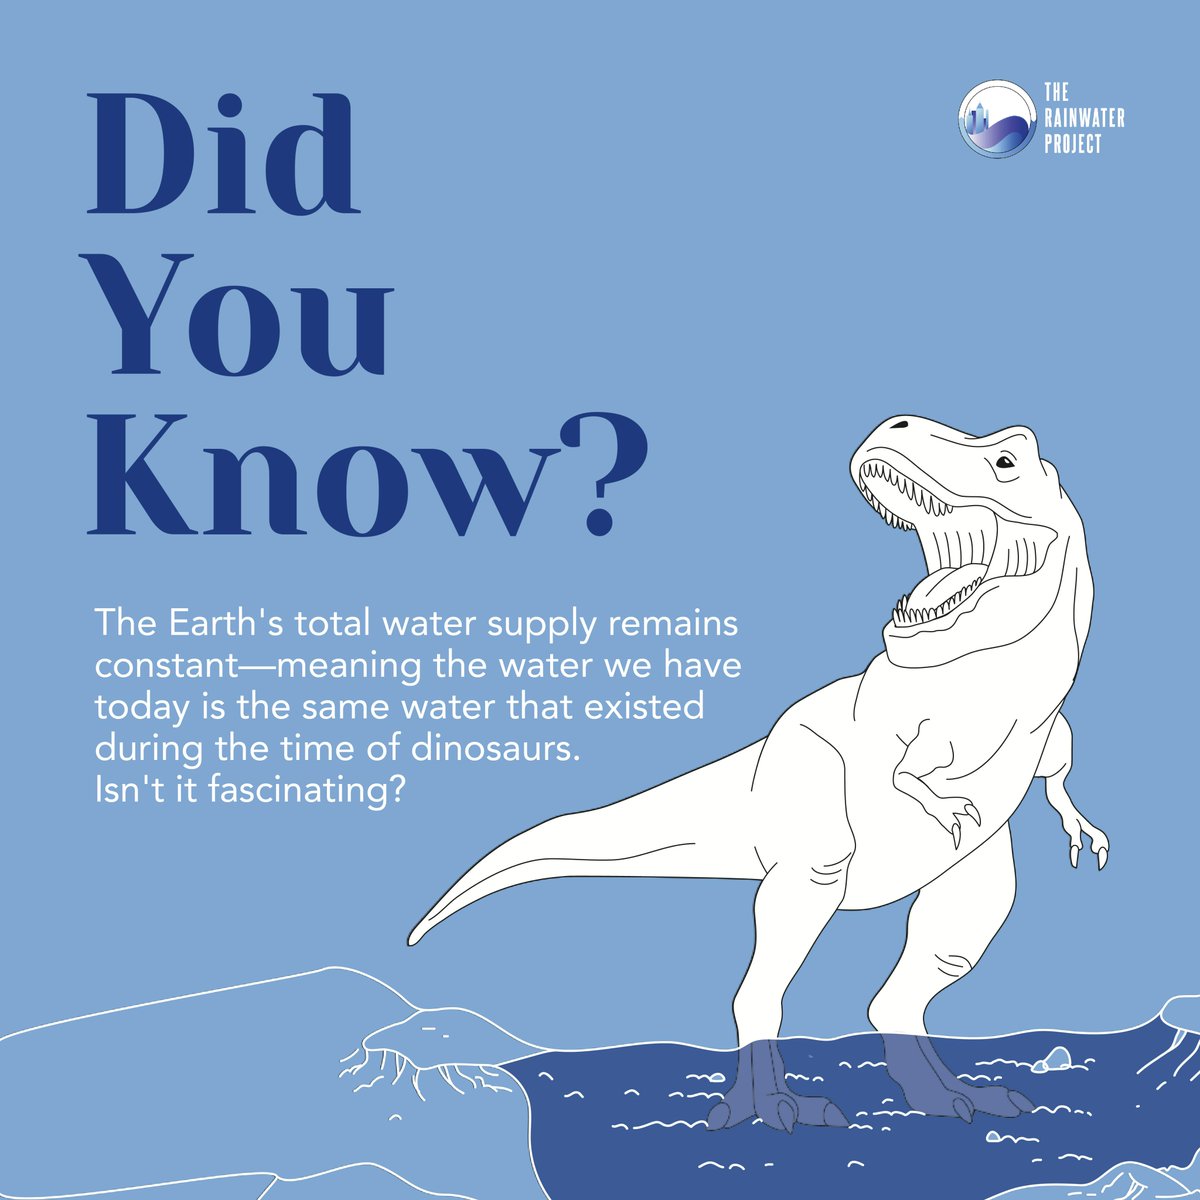 The Earth's water remains constant, echoing through epochs. Let's embrace water conservation to secure a sustainable future for generations to come. . . . . . . . . #TheRainWaterProject #MakeIndiaBetter #DidYouKnow